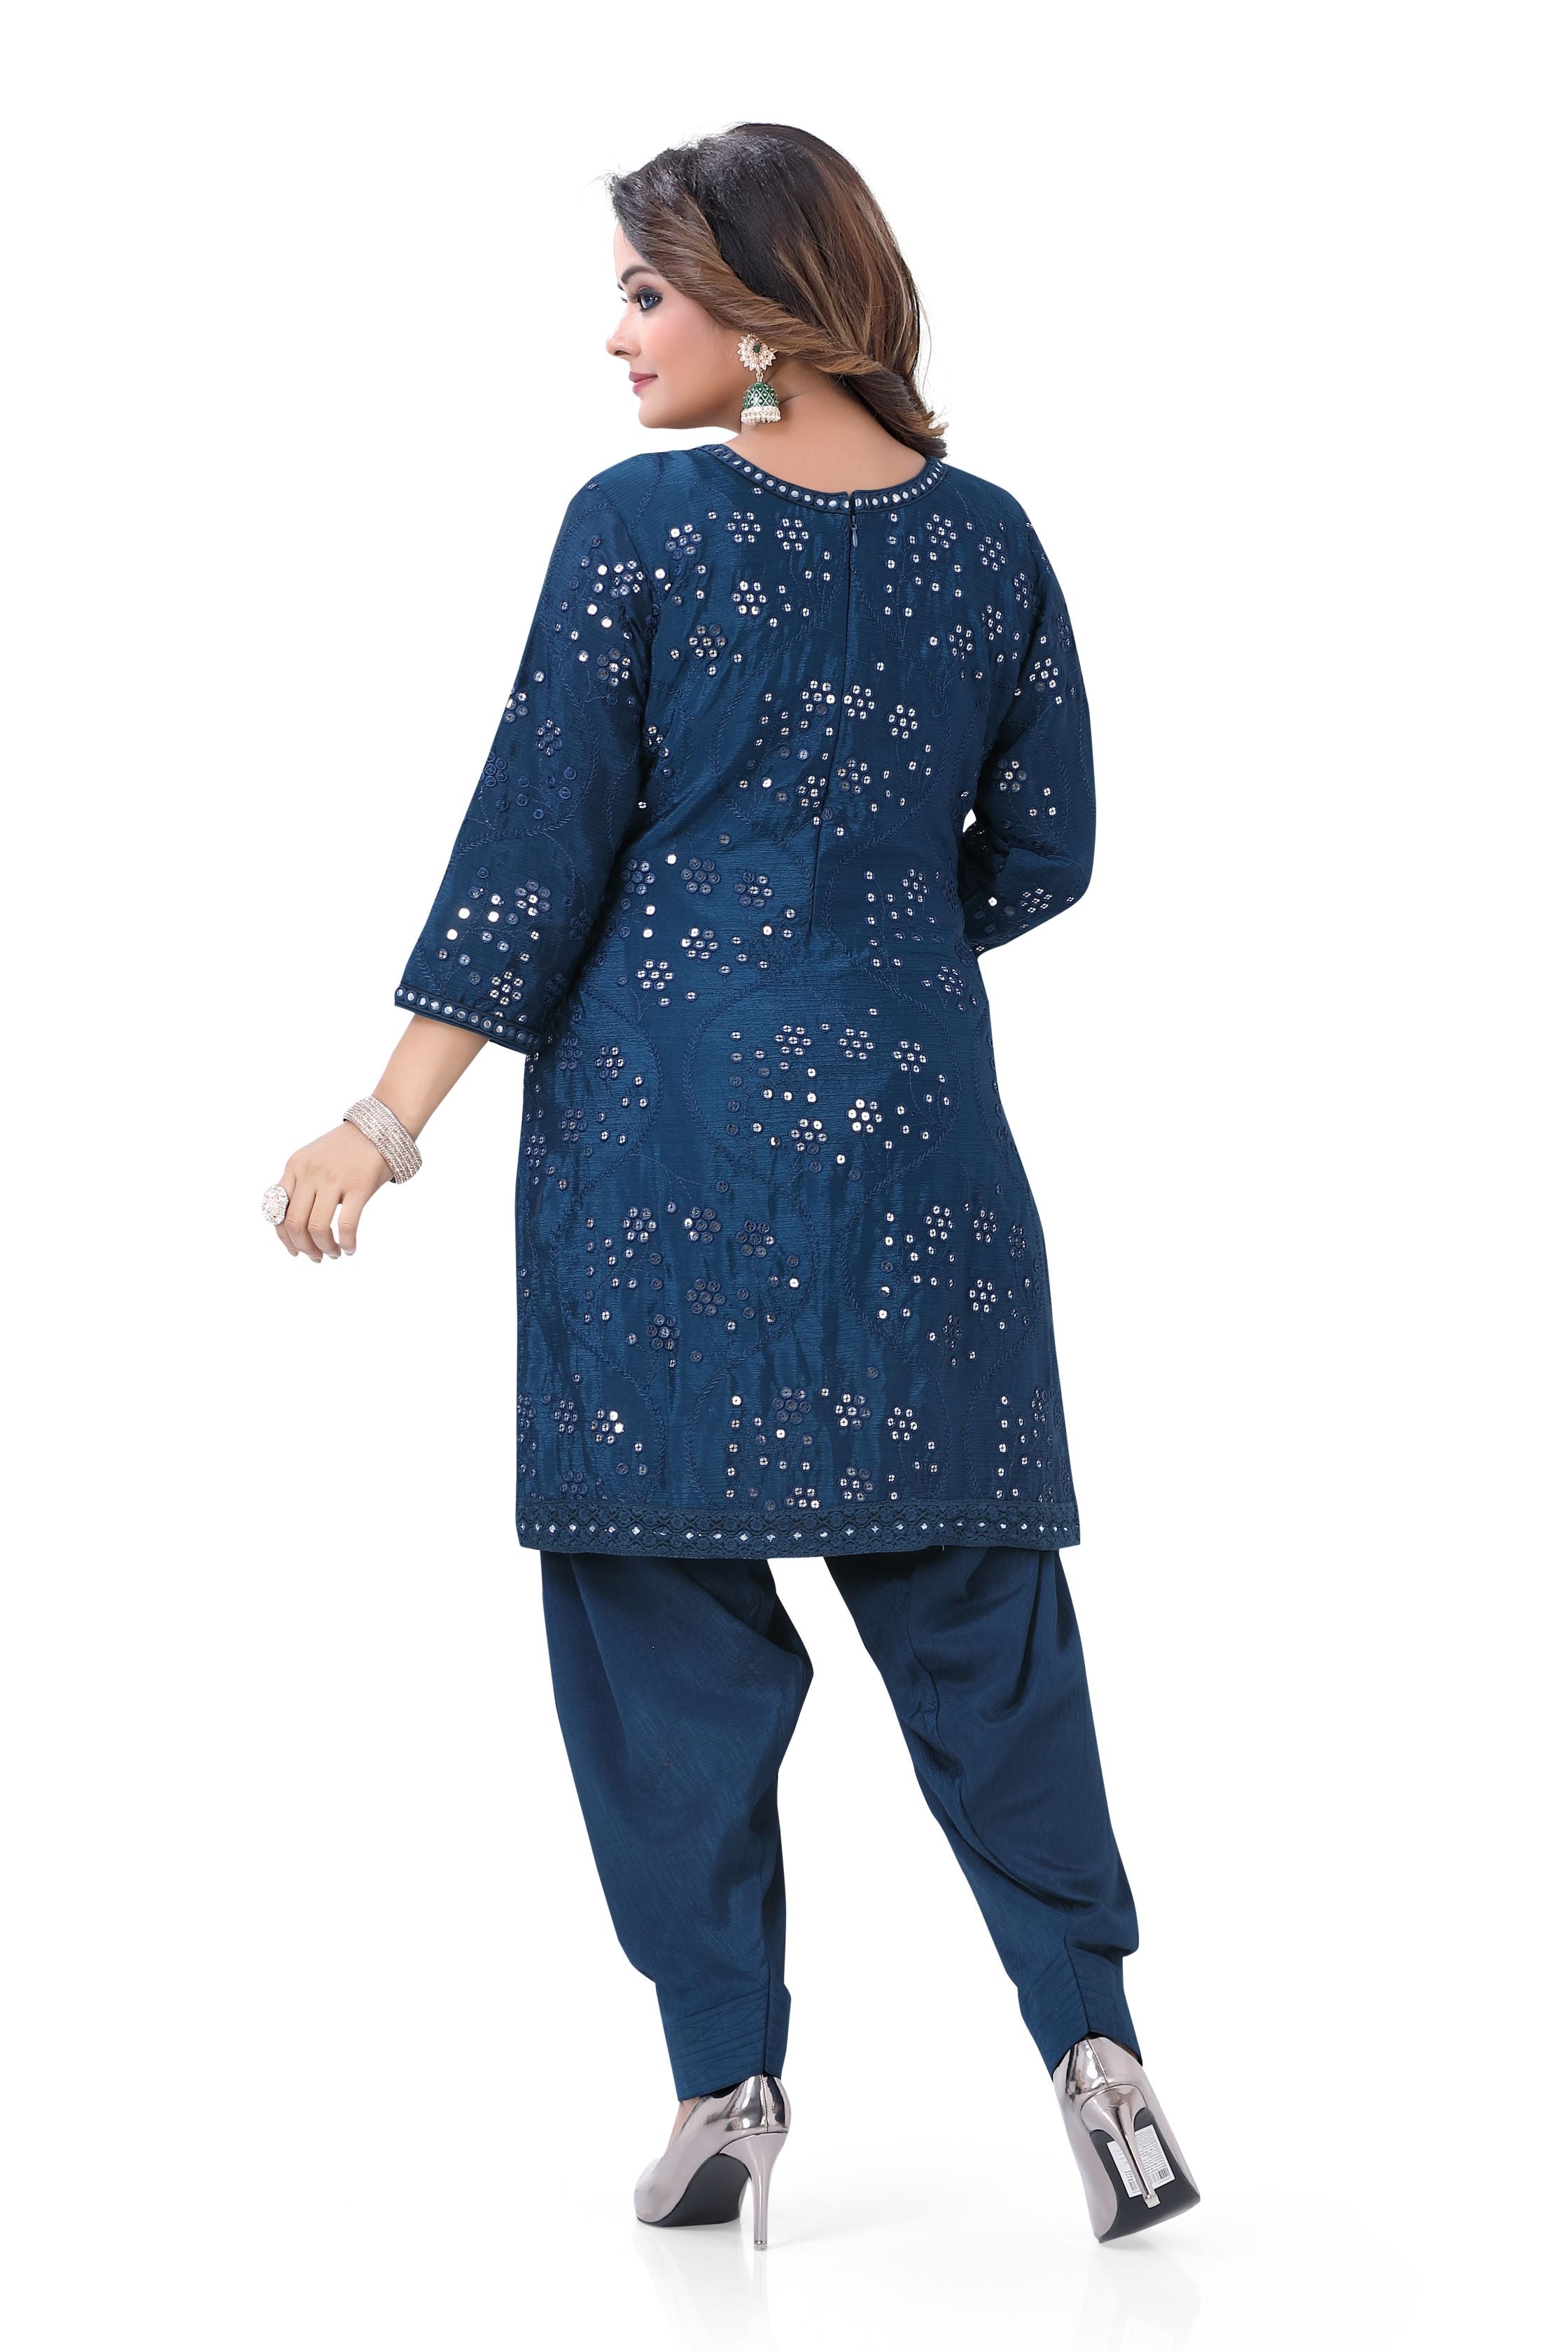 Patiyala Suit in Navy Blue - Premium Festive Wear from Dulhan Exclusives - Just $149! Shop now at Dulhan Exclusives